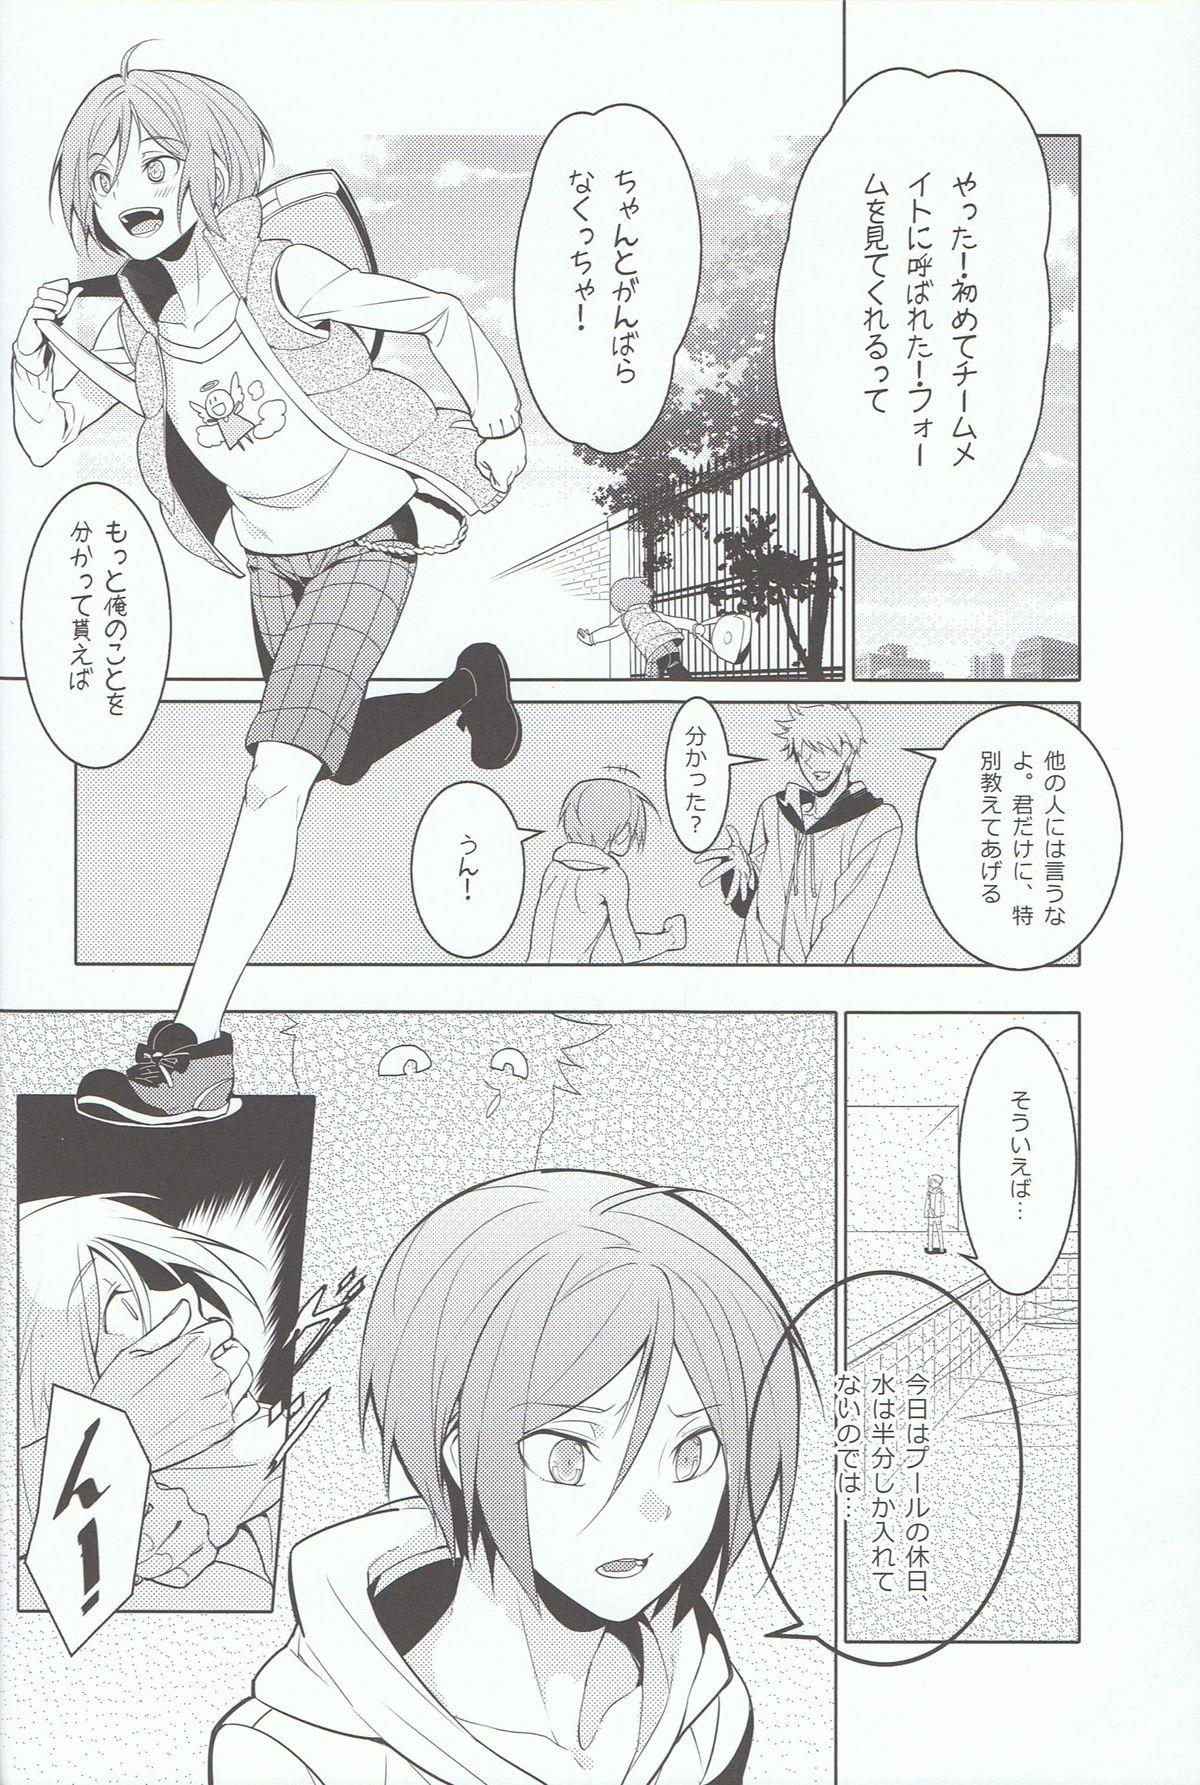 Trimmed Rin-chan! Ganbare!! - Free Outdoor - Page 7